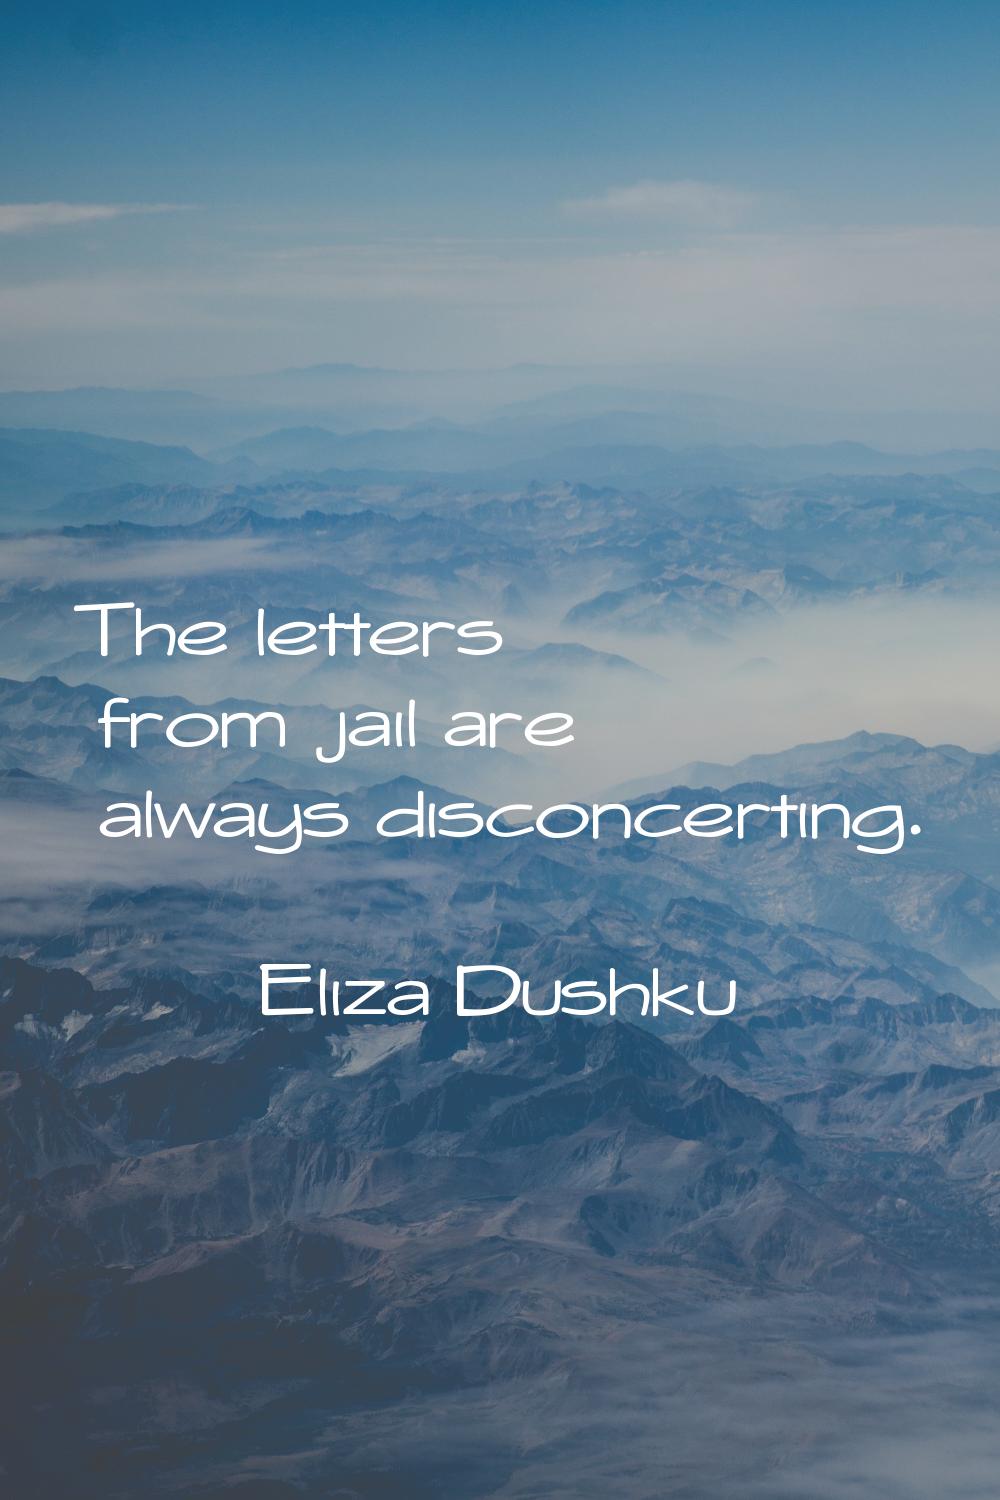 The letters from jail are always disconcerting.